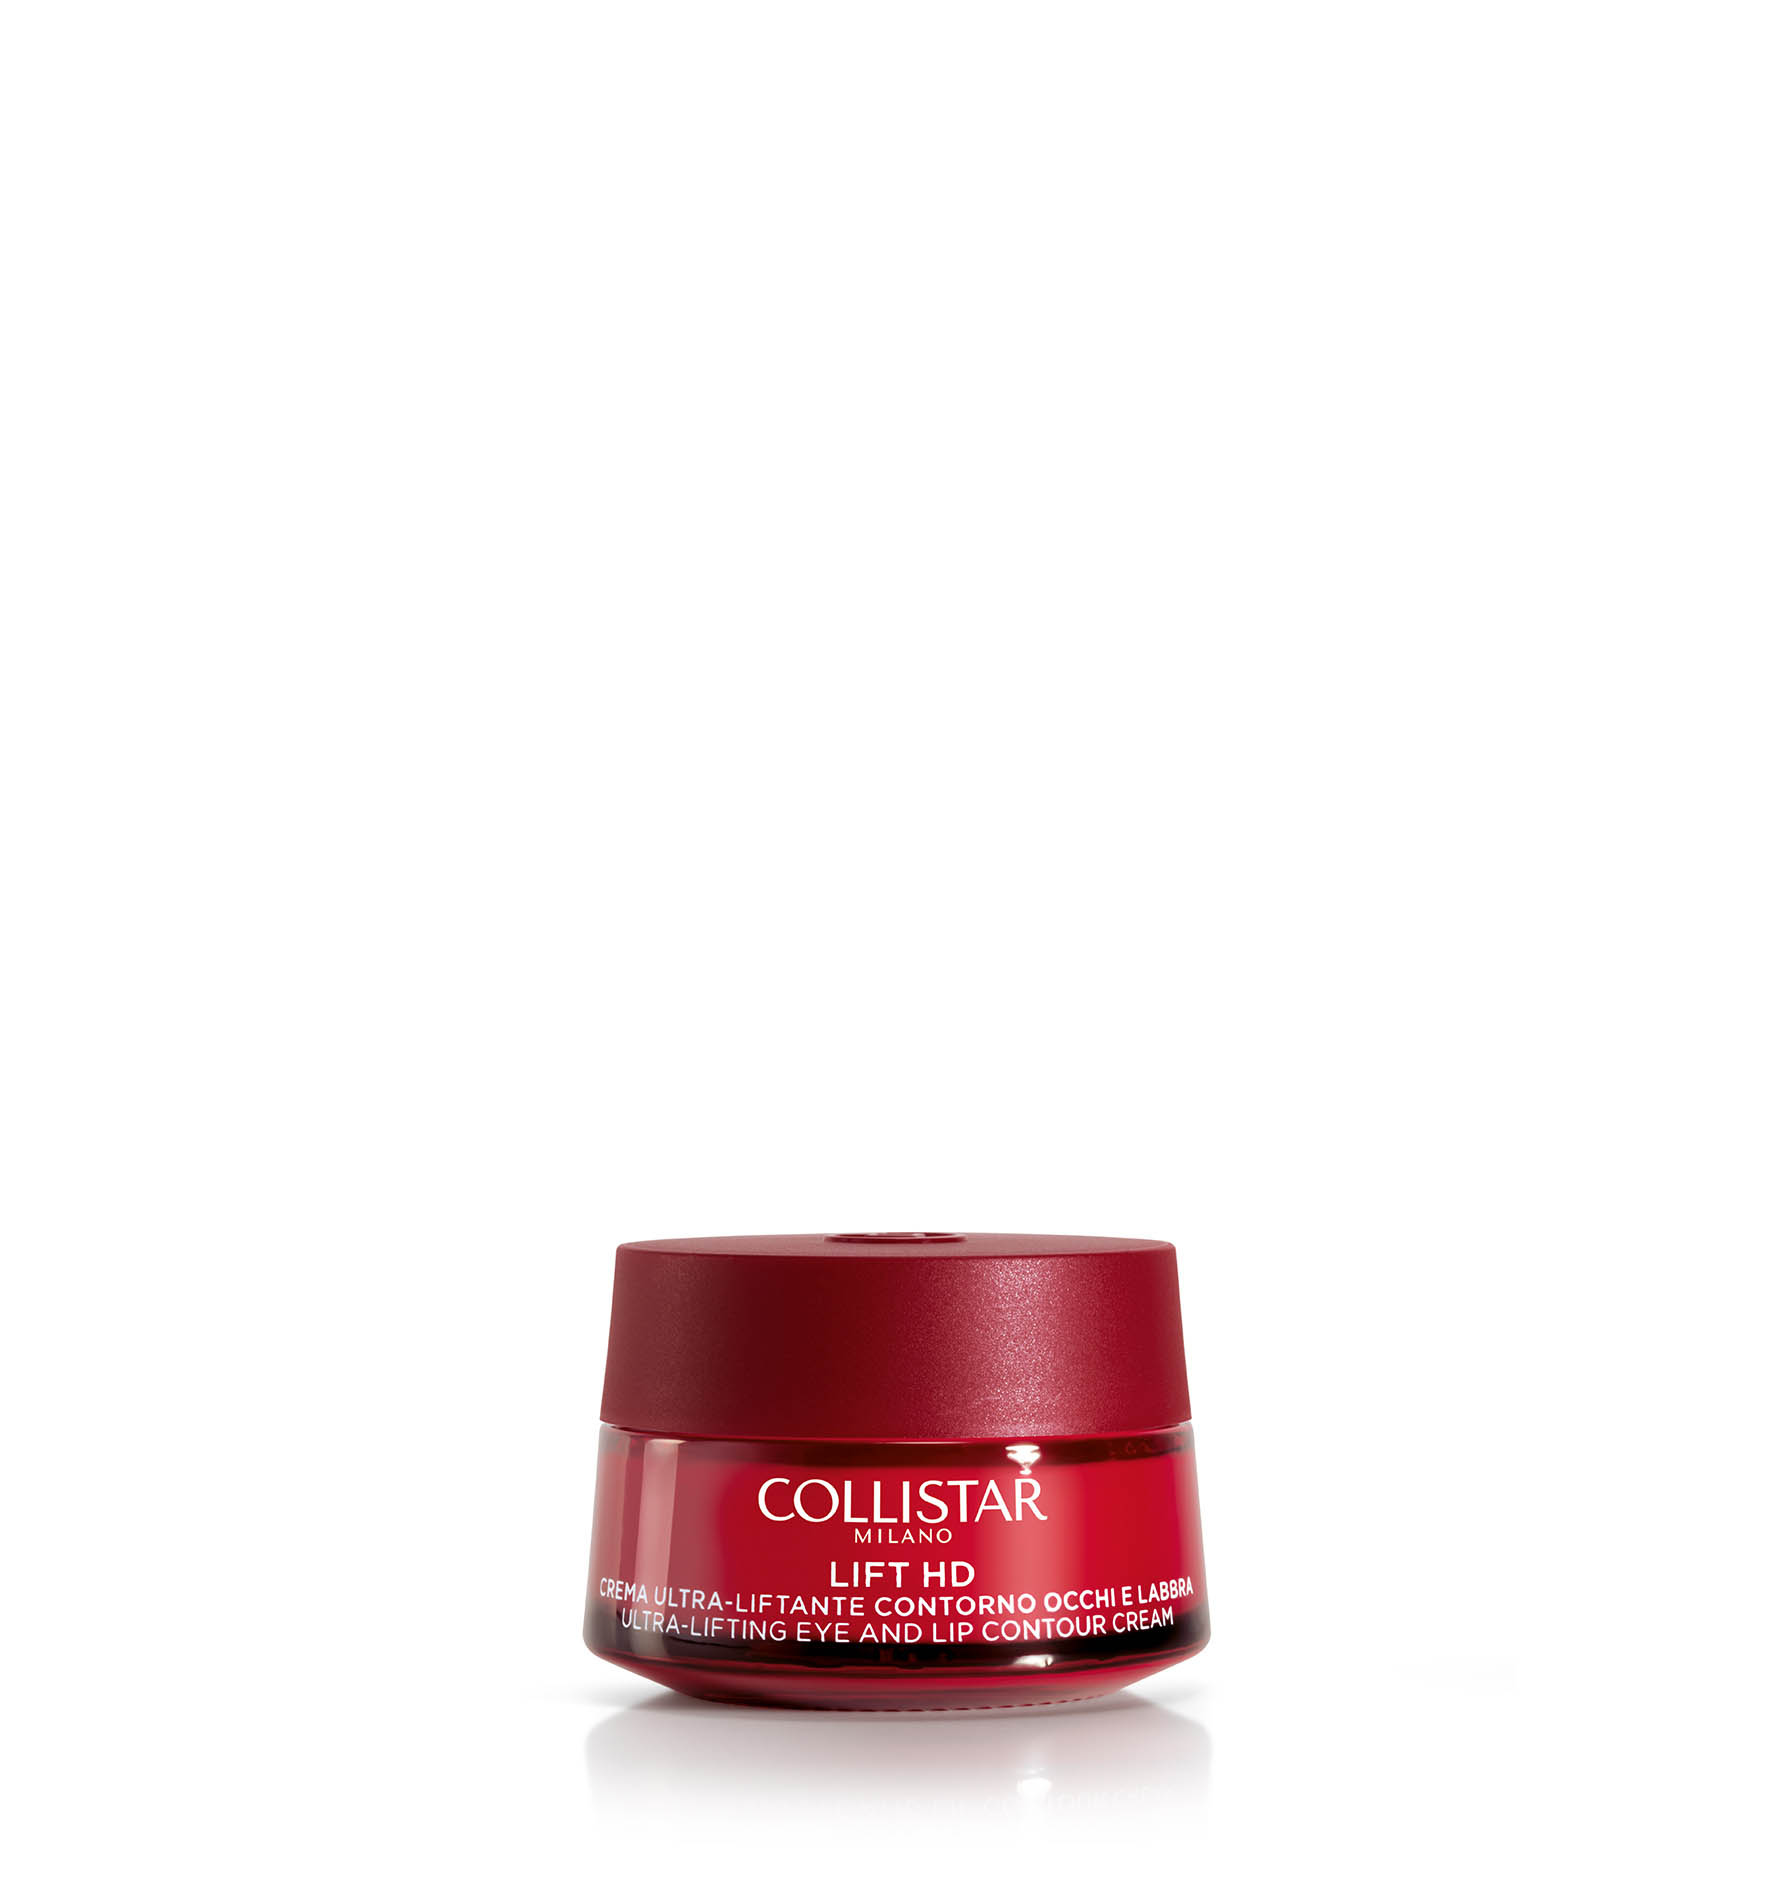 ULTRA-LIFTING EYE AND LIP CONTOUR CREAM - Lifting | Collistar - Shop Online Ufficiale